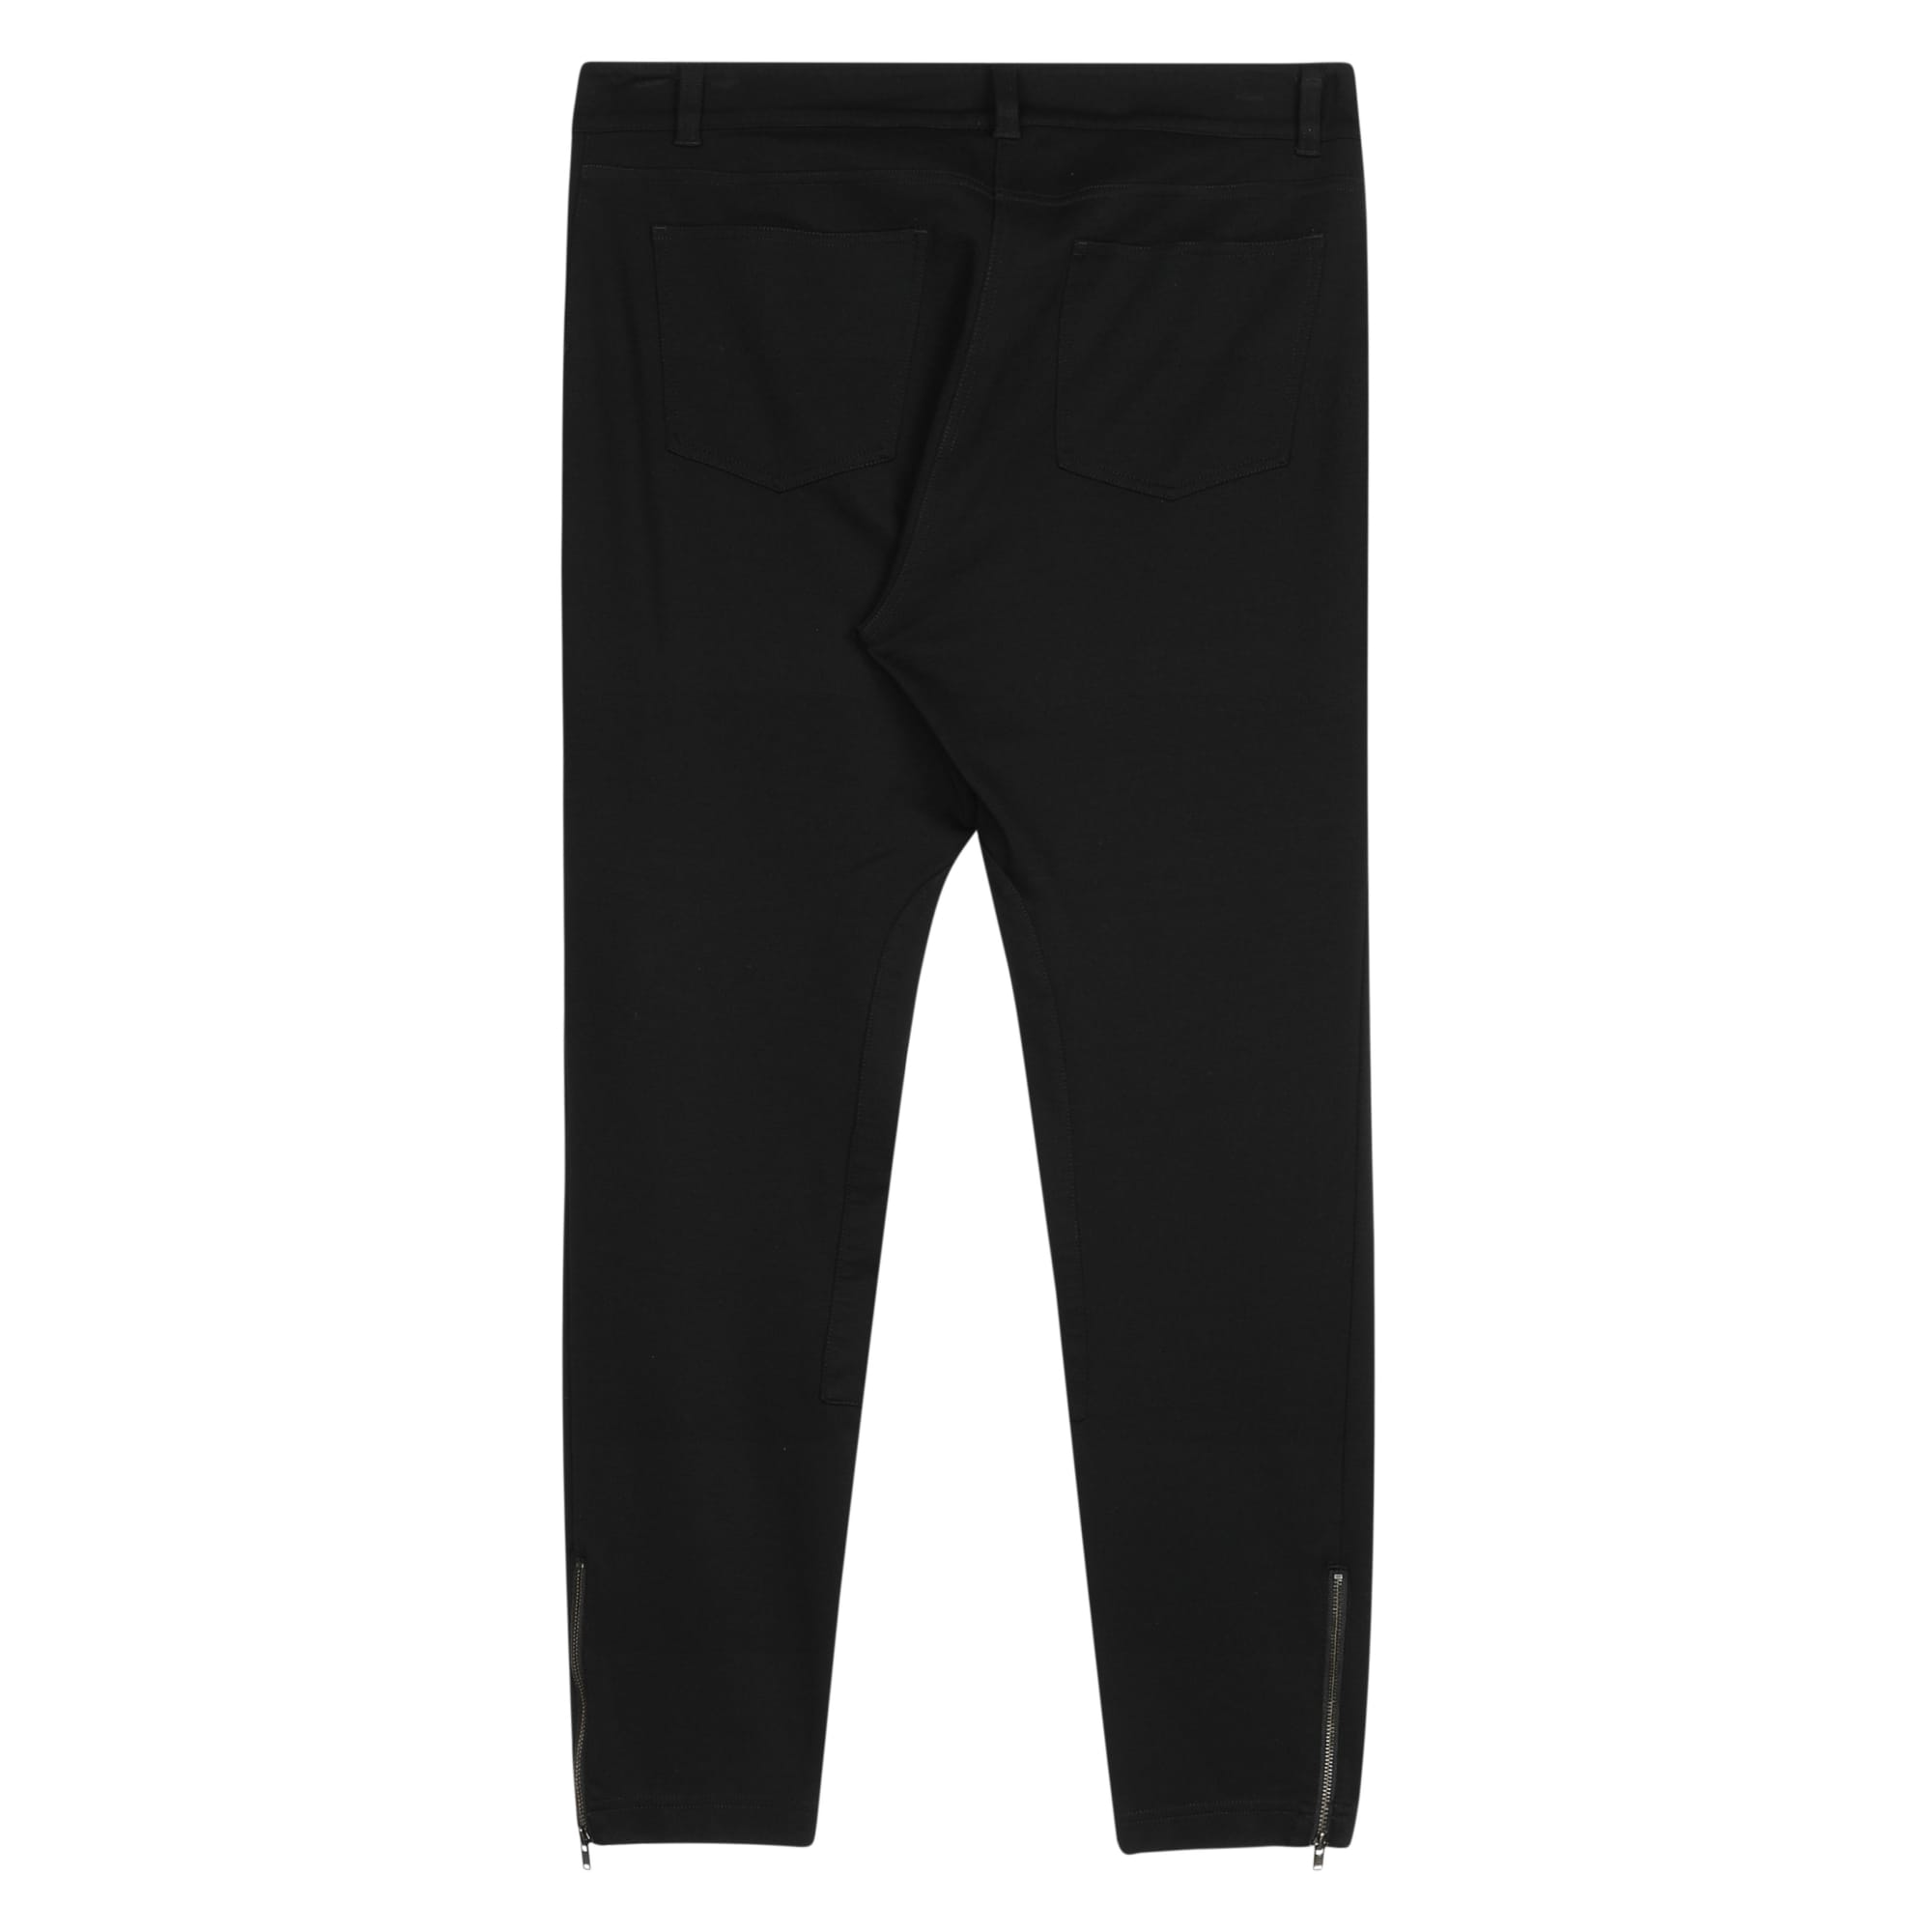 Used Heavyweight Rayon Knit Pant Black | EILEEN FISHER RENEW